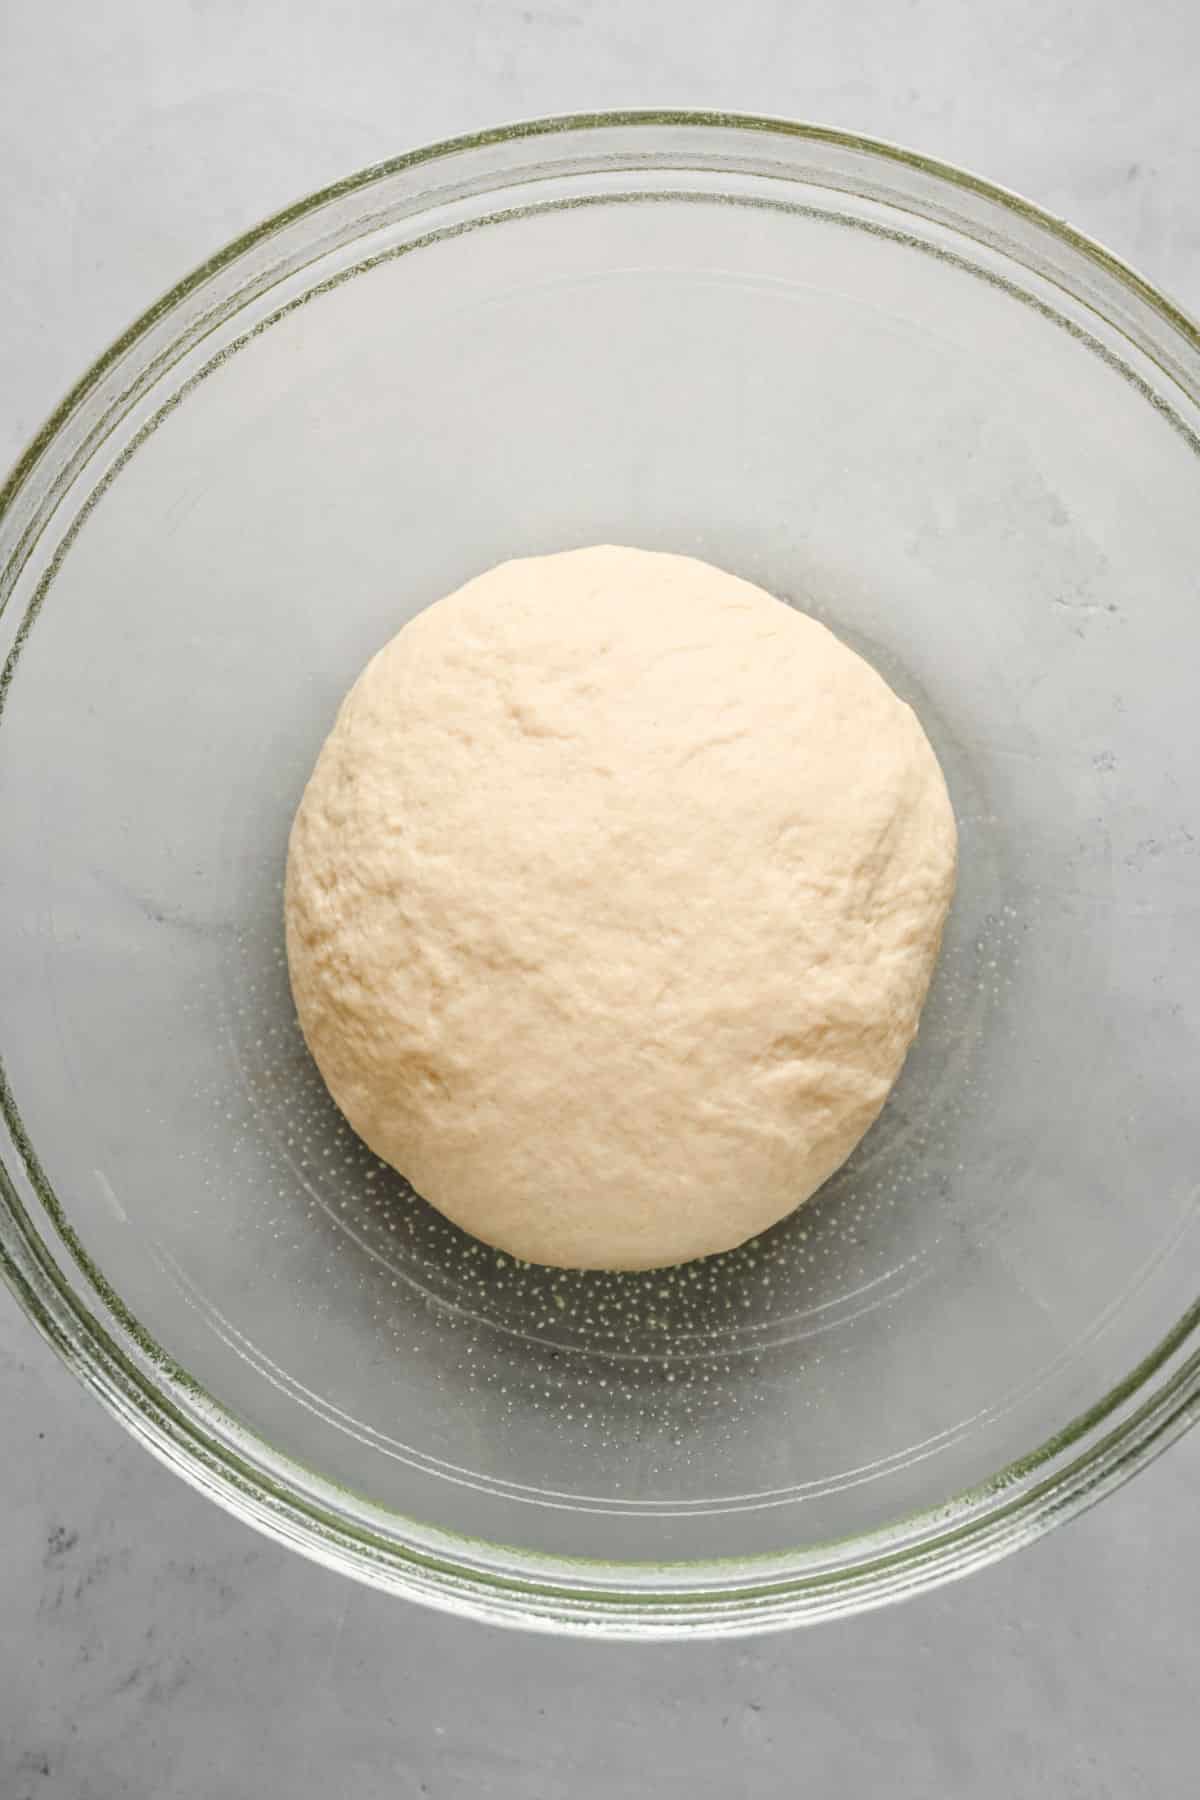 Flatbread dough in a glass mixing bowl. 